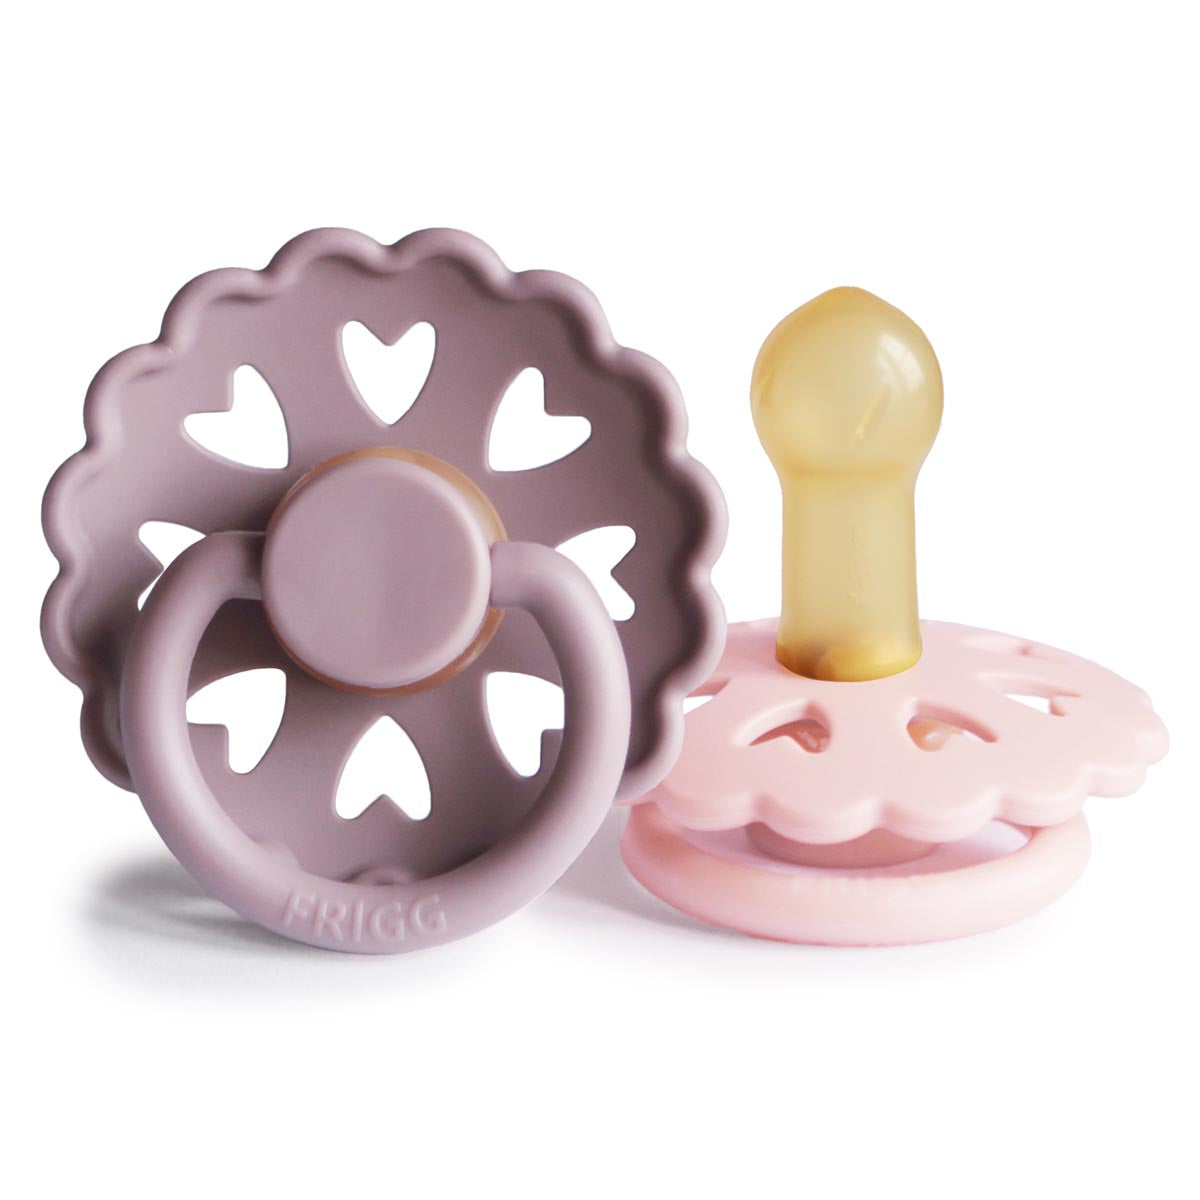 FRIGG Fairytale Pacifier 2 Pack Latex